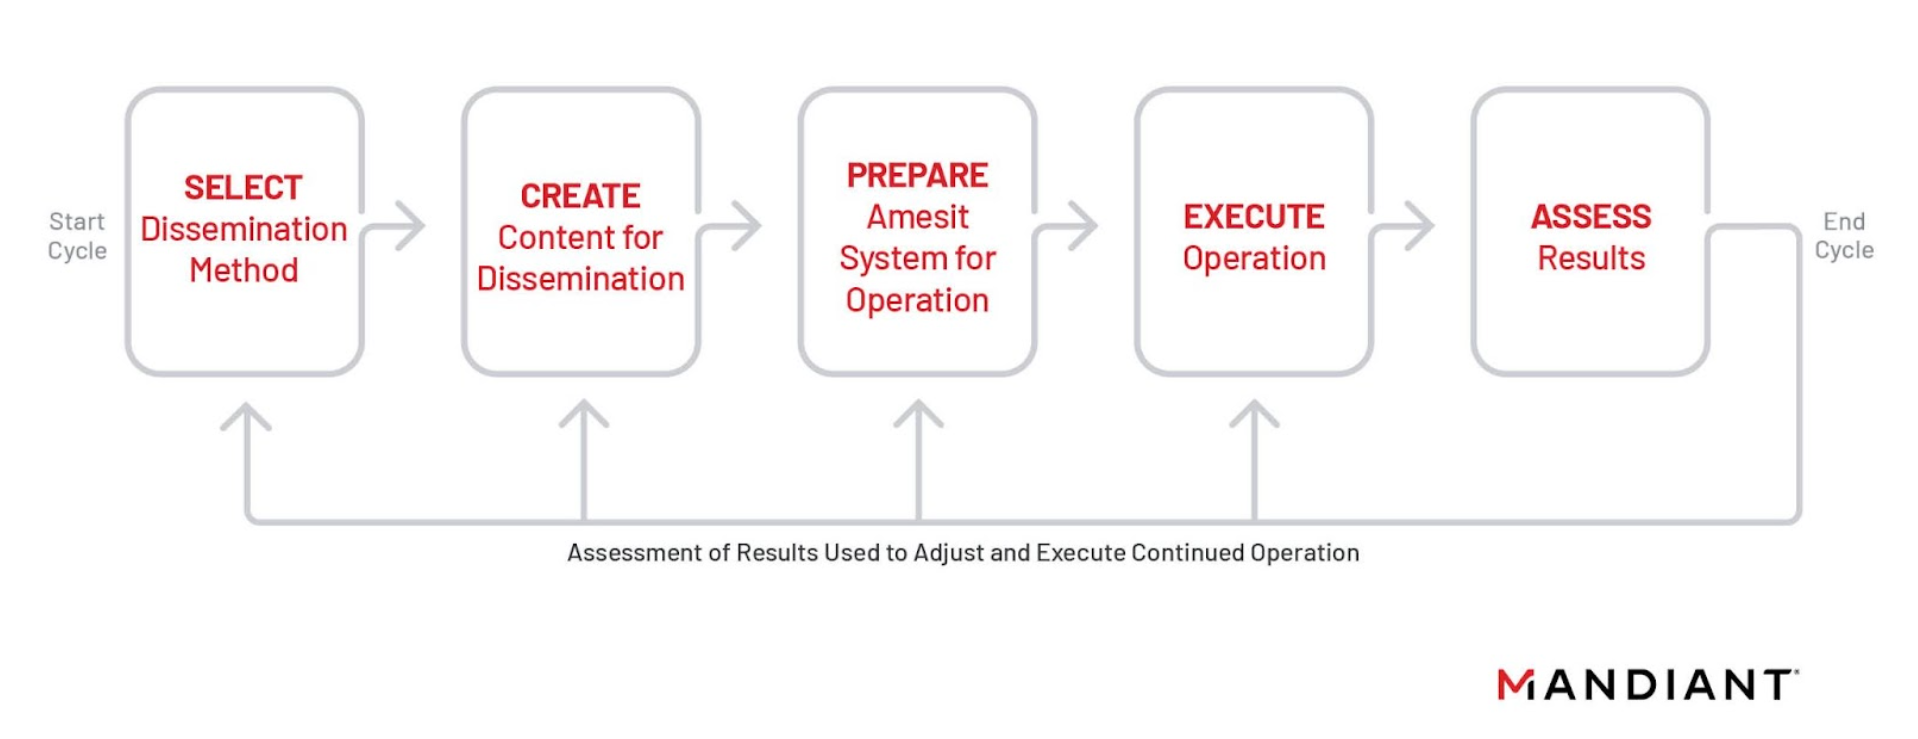 The documents detailing Amesit’s functionality outline a specific information operations cycle that the system should support